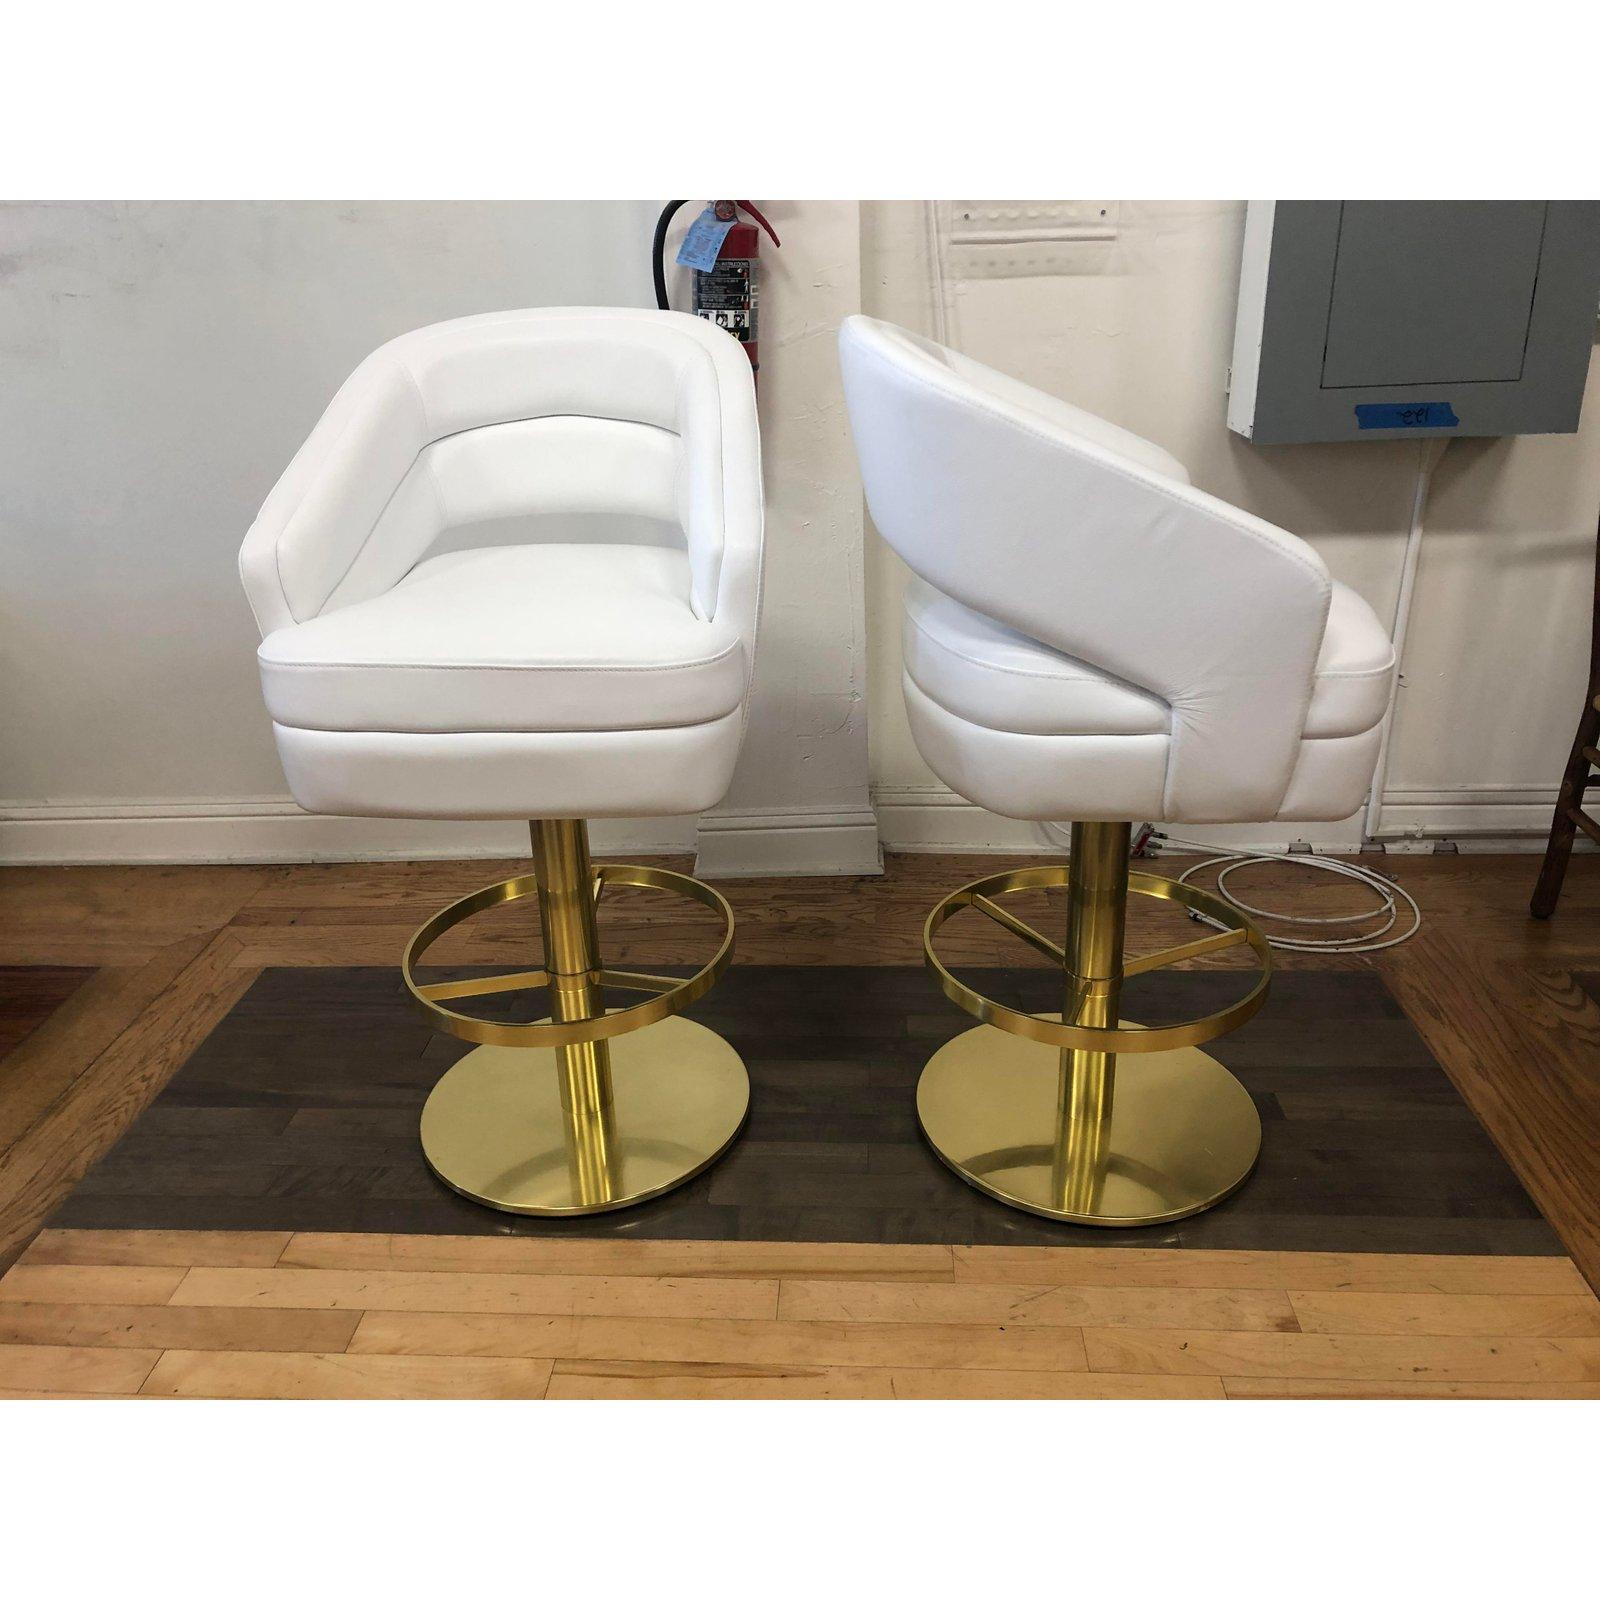 Russel barstool by Essential Homes. A modern nod to an inspiration of Hollywood Regency and Art Deco. Upholstered in a white leather with a golden polished brass base. The base can spin 360 degrees, providing stress-free movement to delve into the